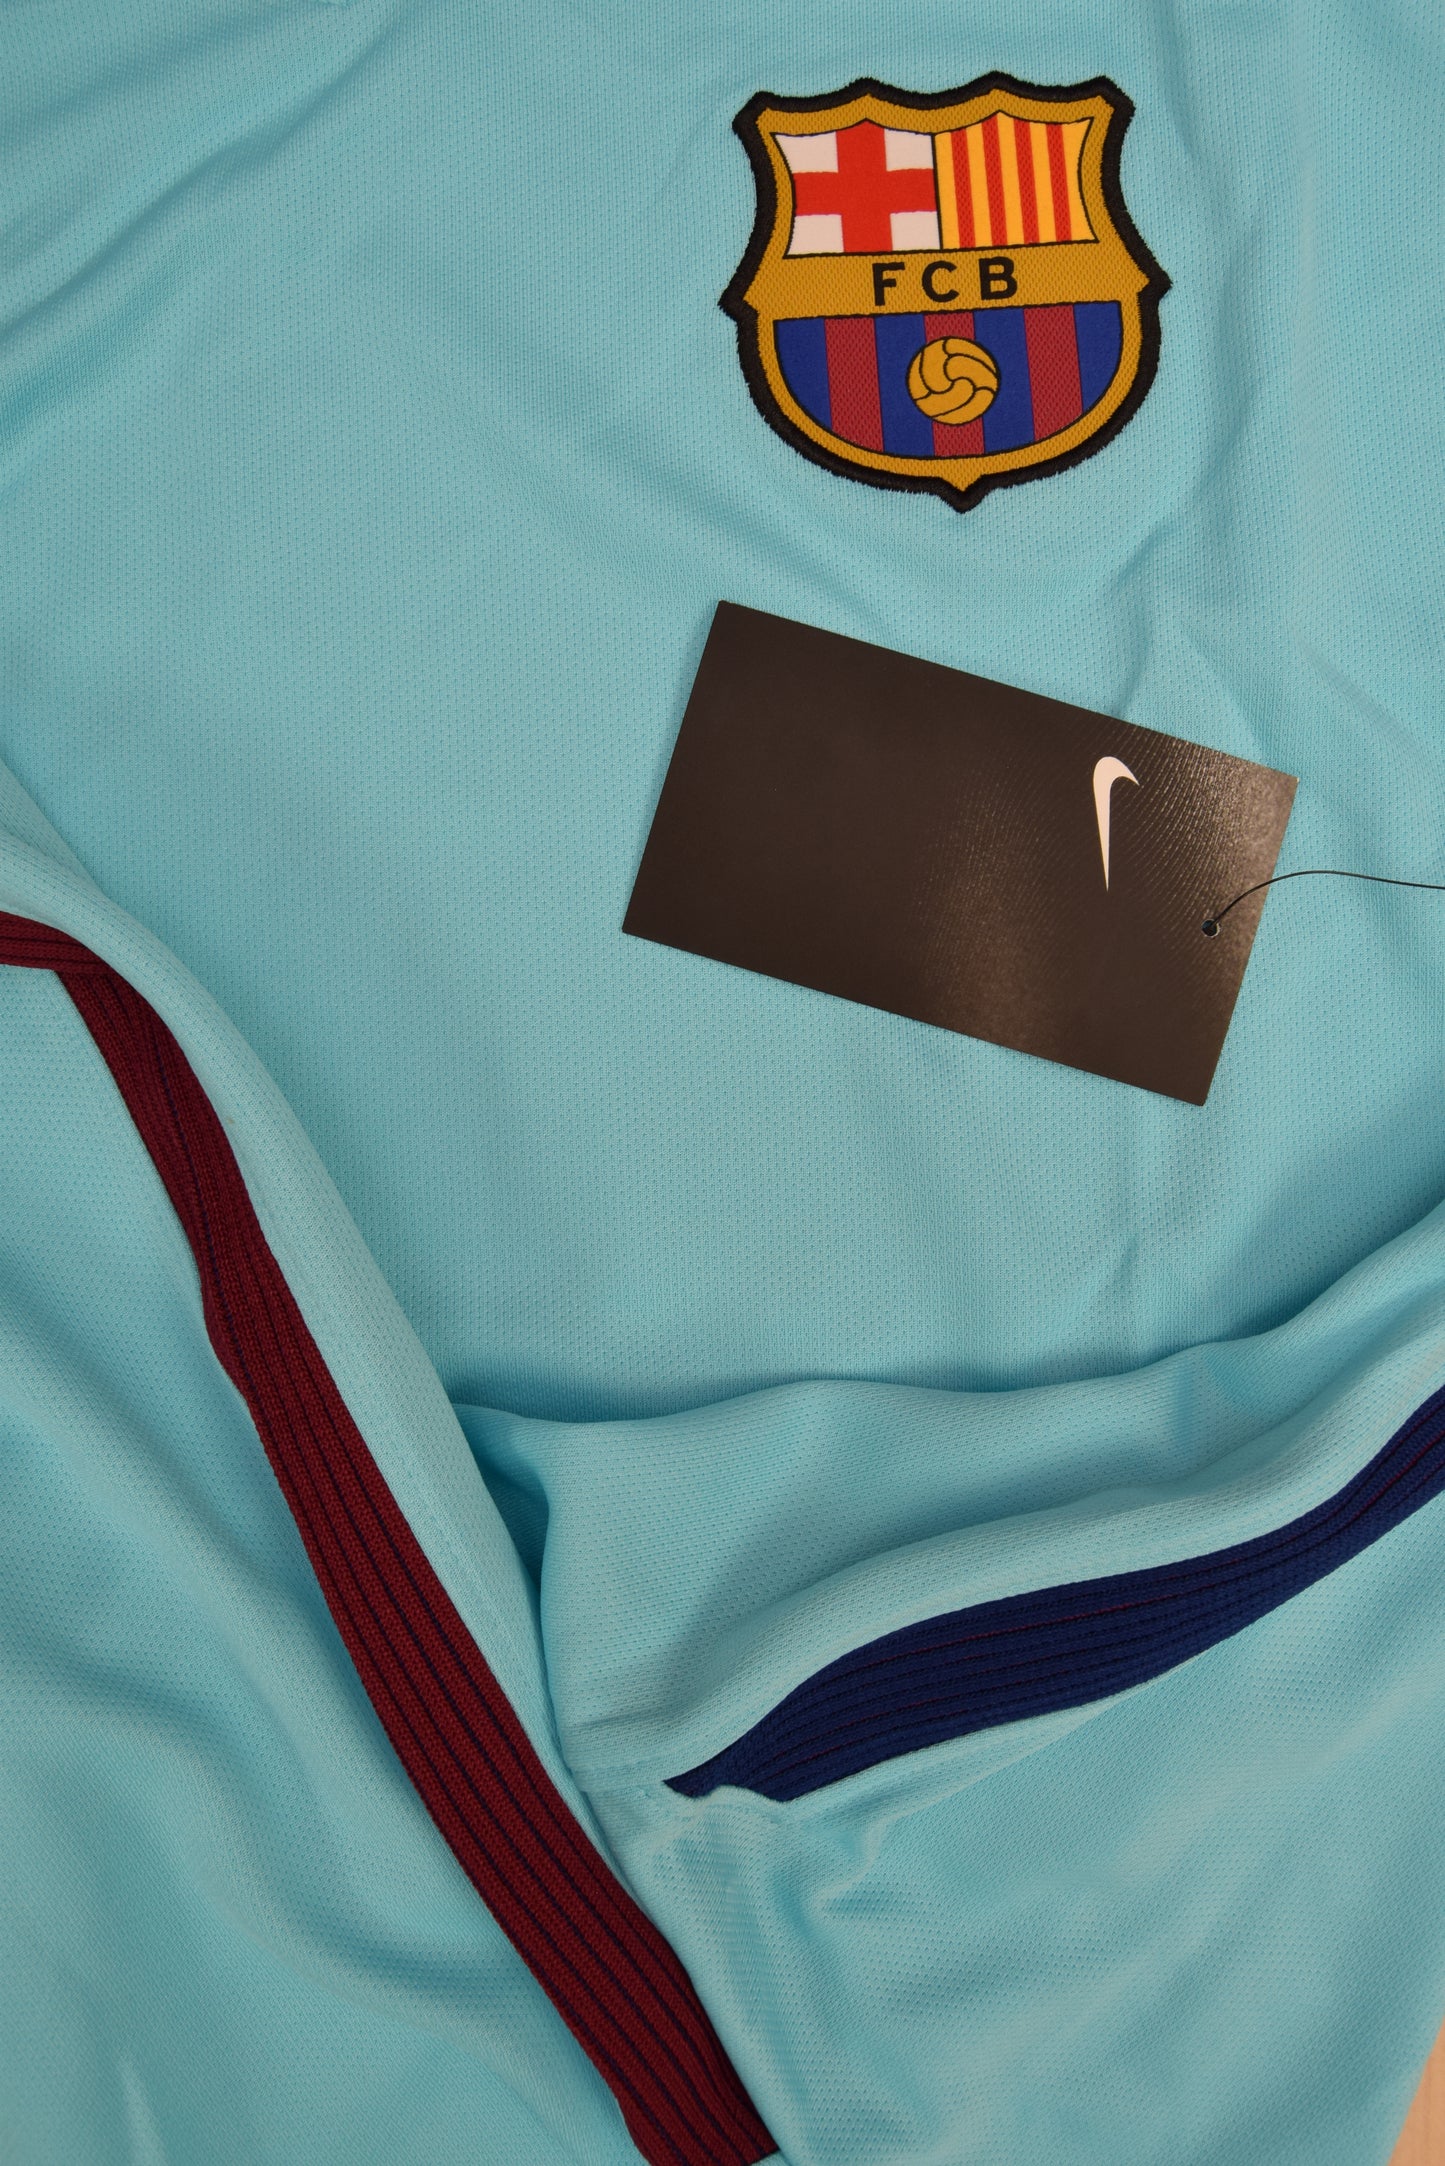 Authentic New FC Barcelona Nike Away Champions League Version Football Shirt 2017-2018 BNWT Deadstock Size L Blue